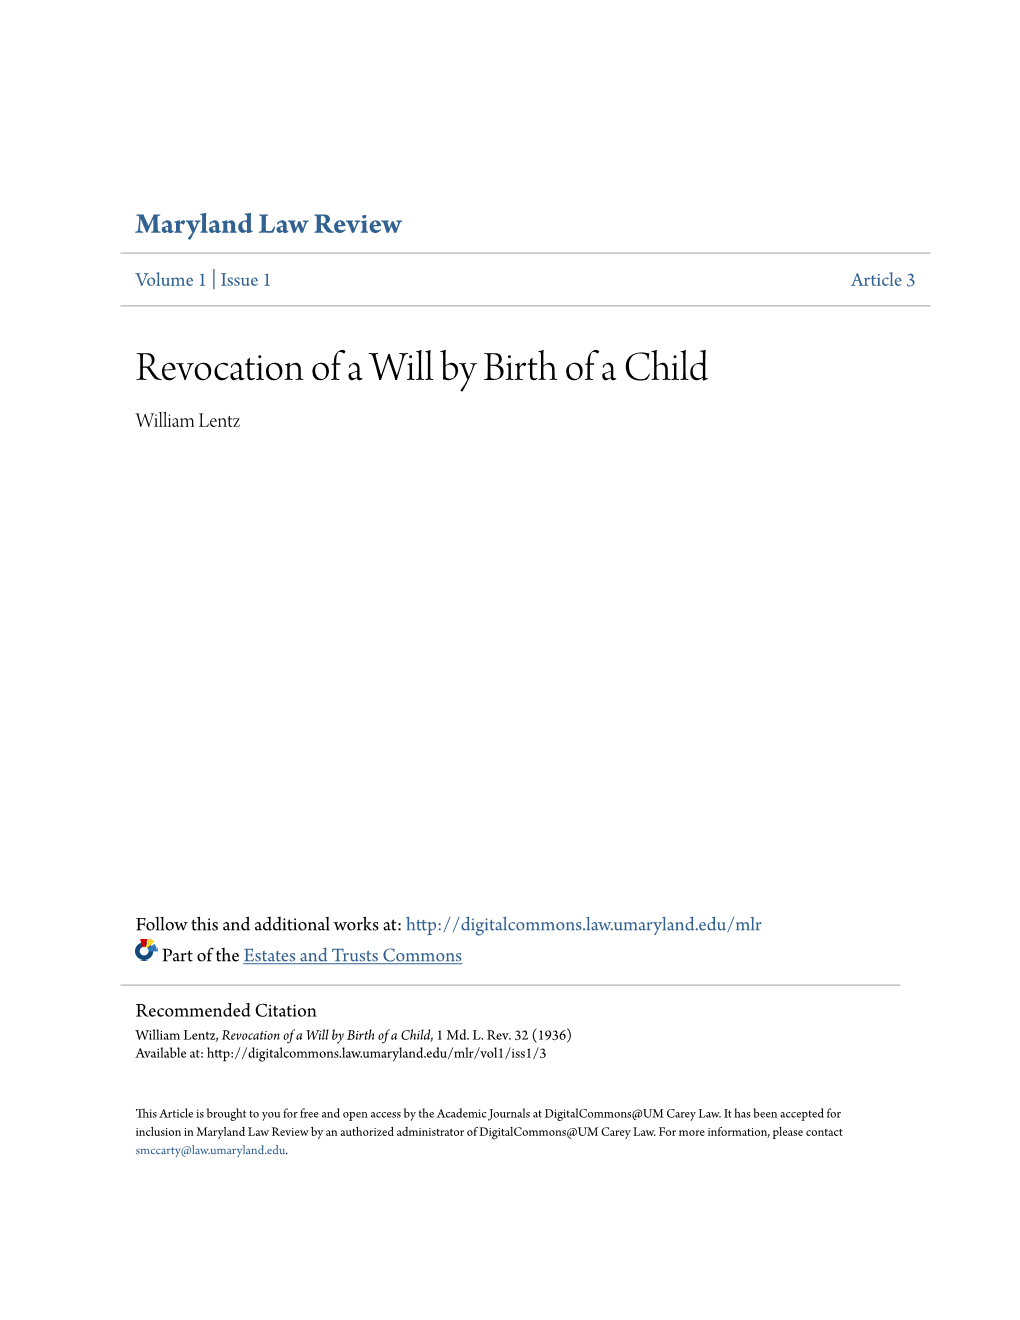 Revocation of a Will by Birth of a Child William Lentz